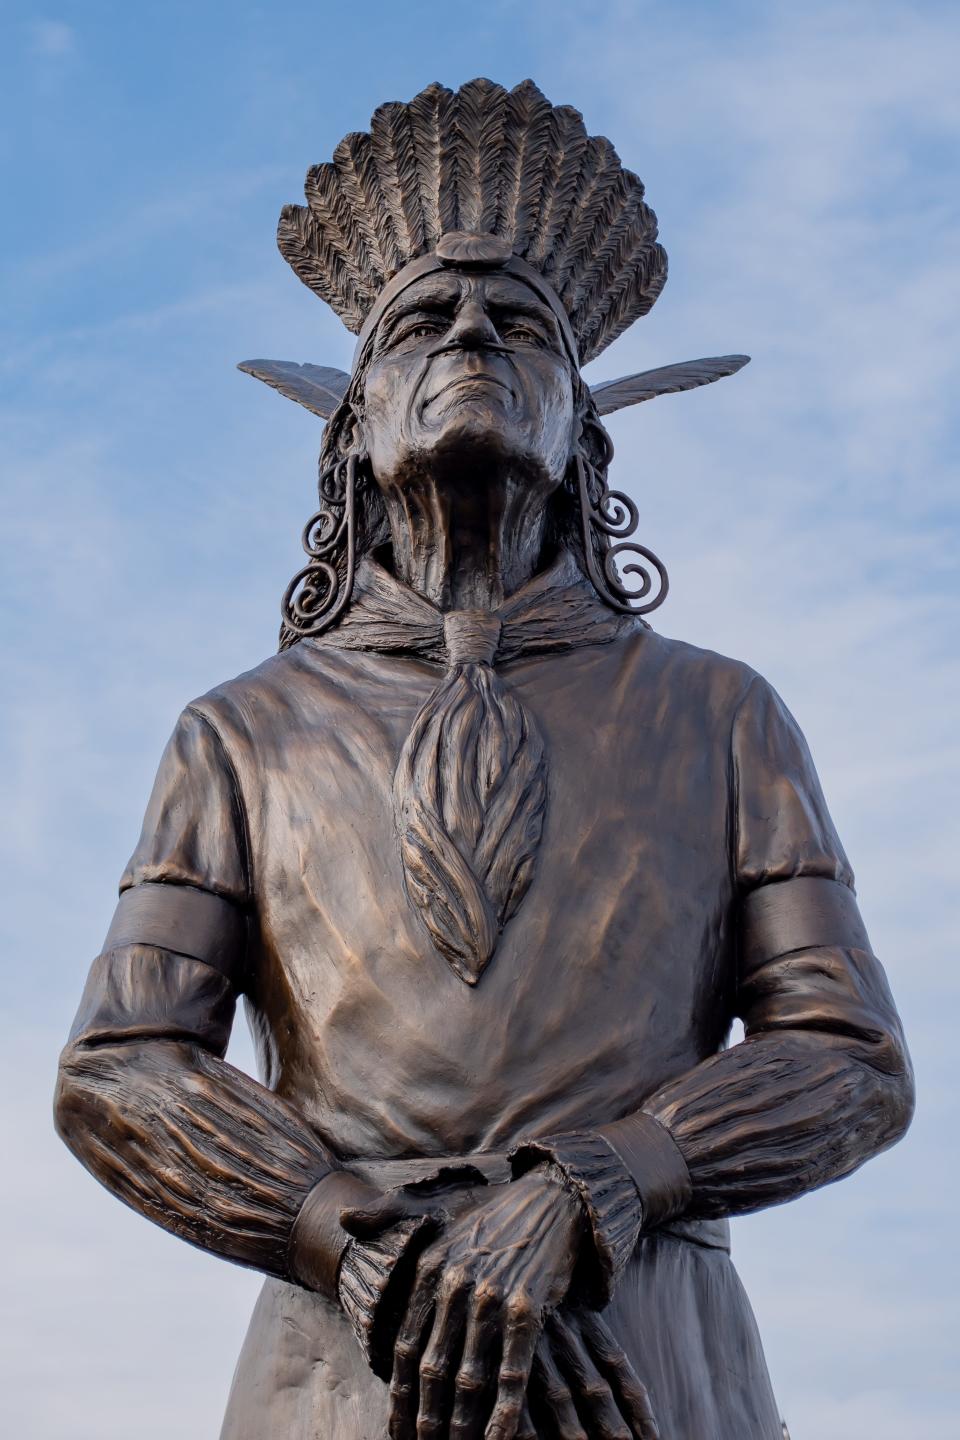 The bronze statue of Chief Netawatwees awaits installation by Alan Cottrill at the new Lenape Diaspora Memorial in Newcomerstown. It is the first of six statues planned for installation.